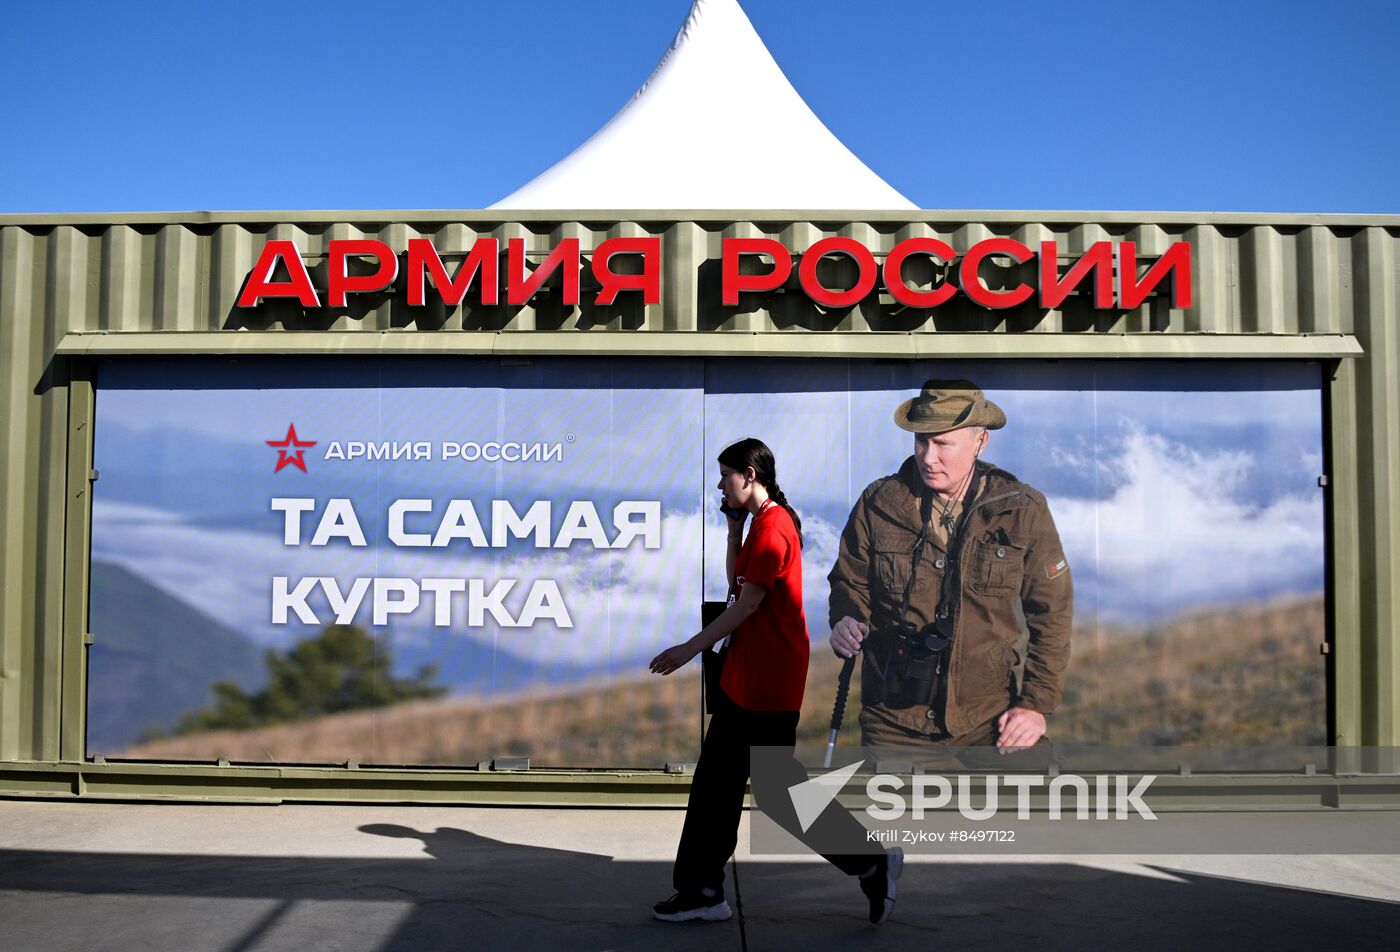 Russia Army Forum